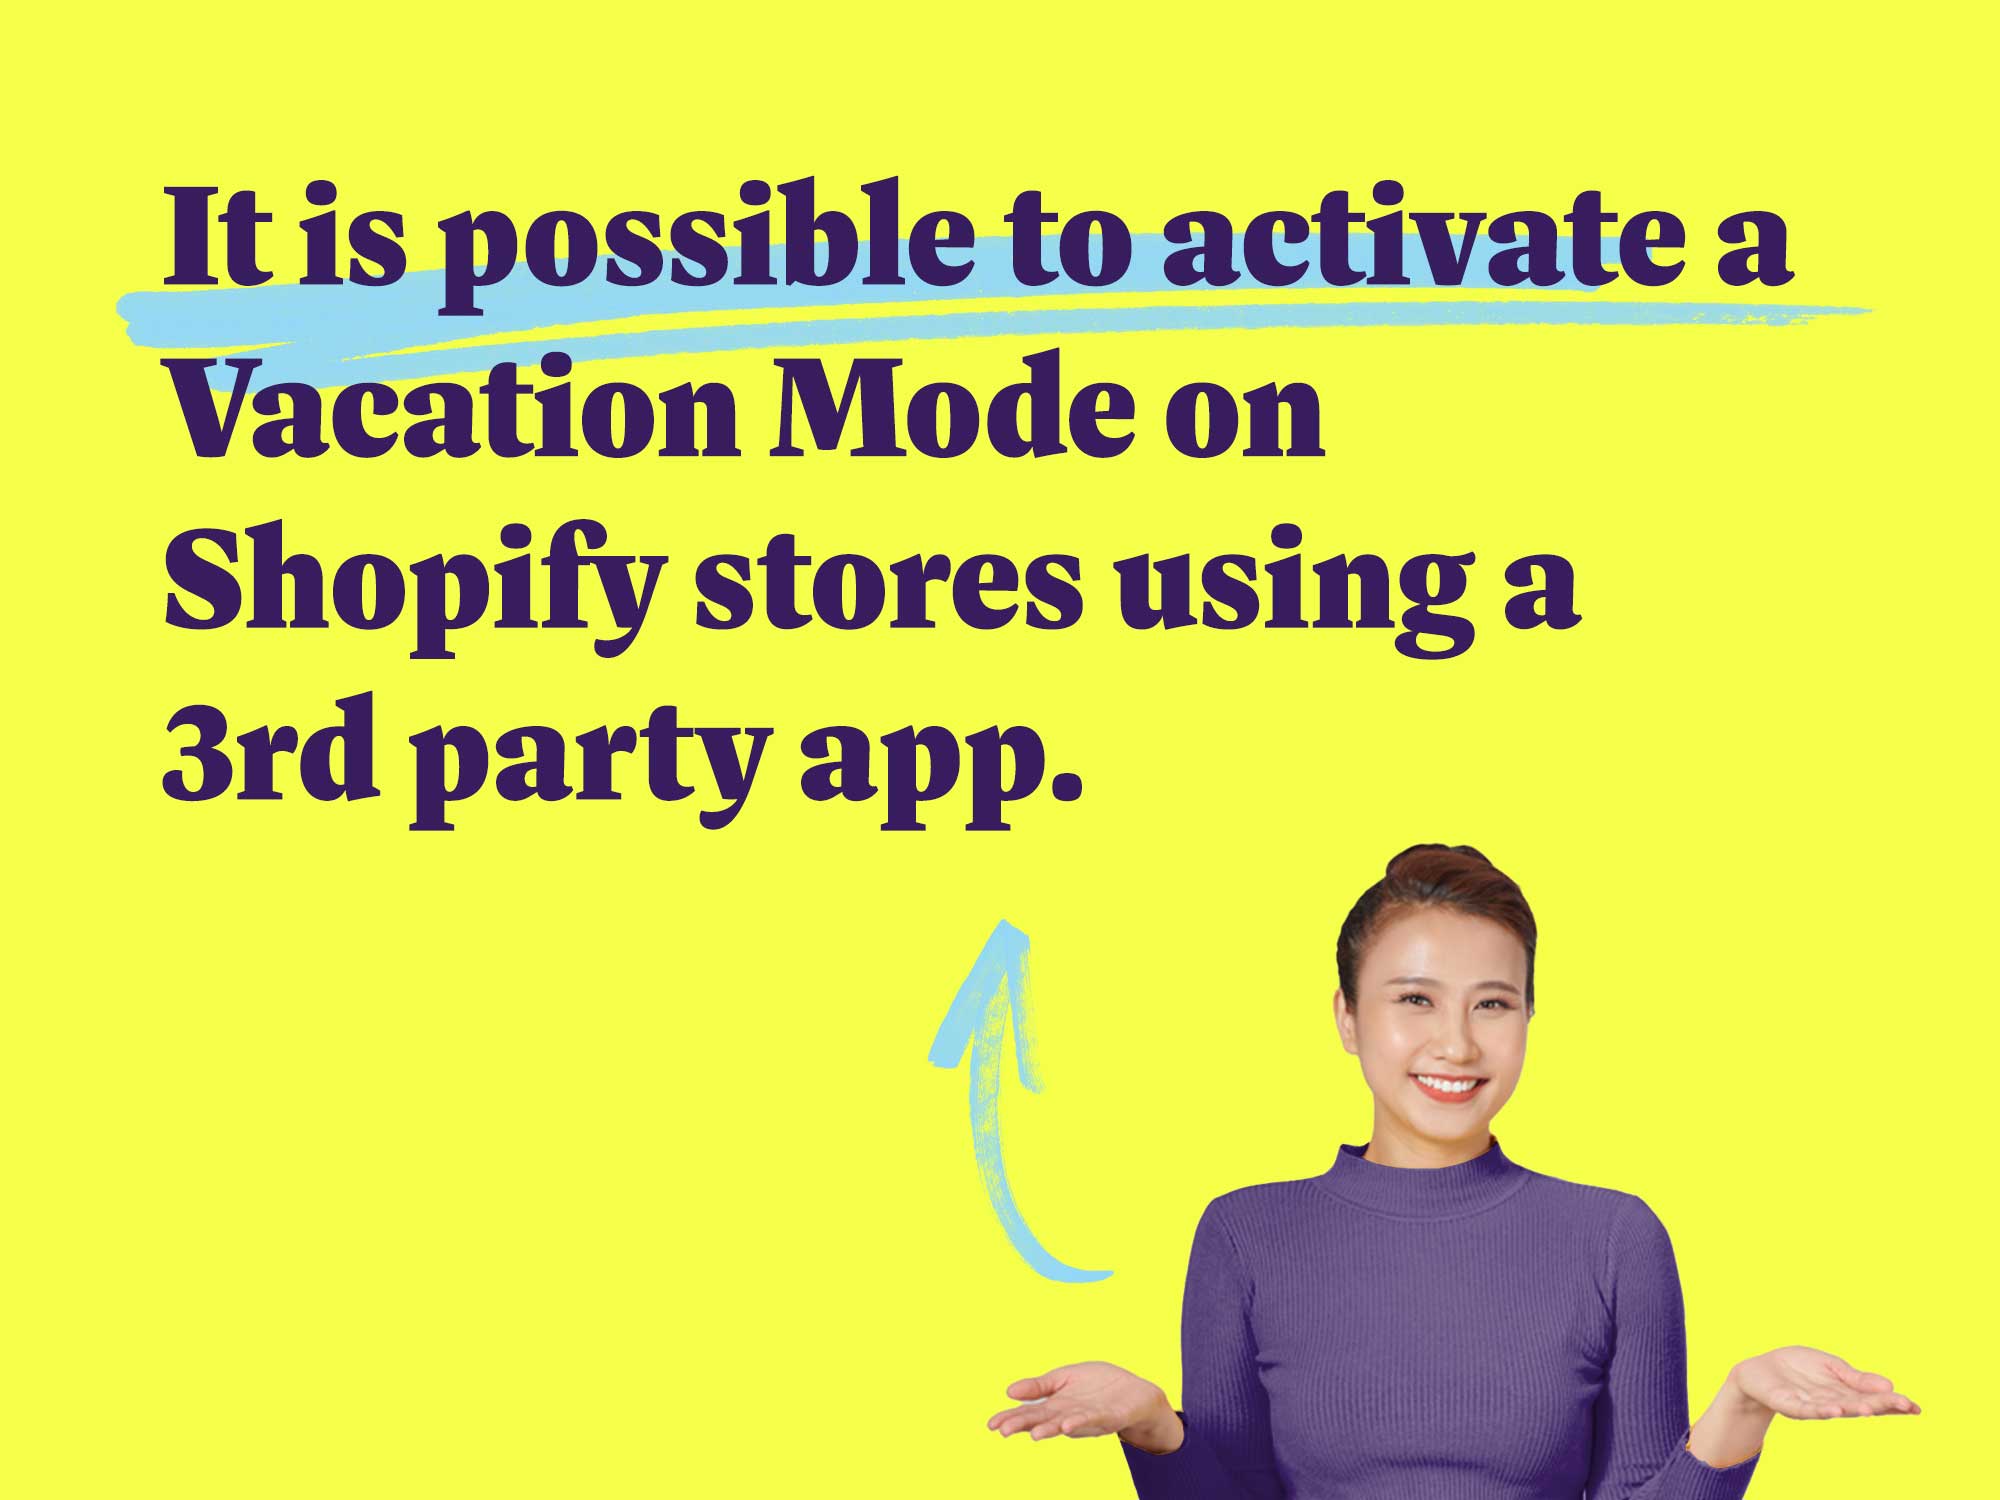 It is possible to activate a Vacation Mode on Shopify stores using a 3rd party app.